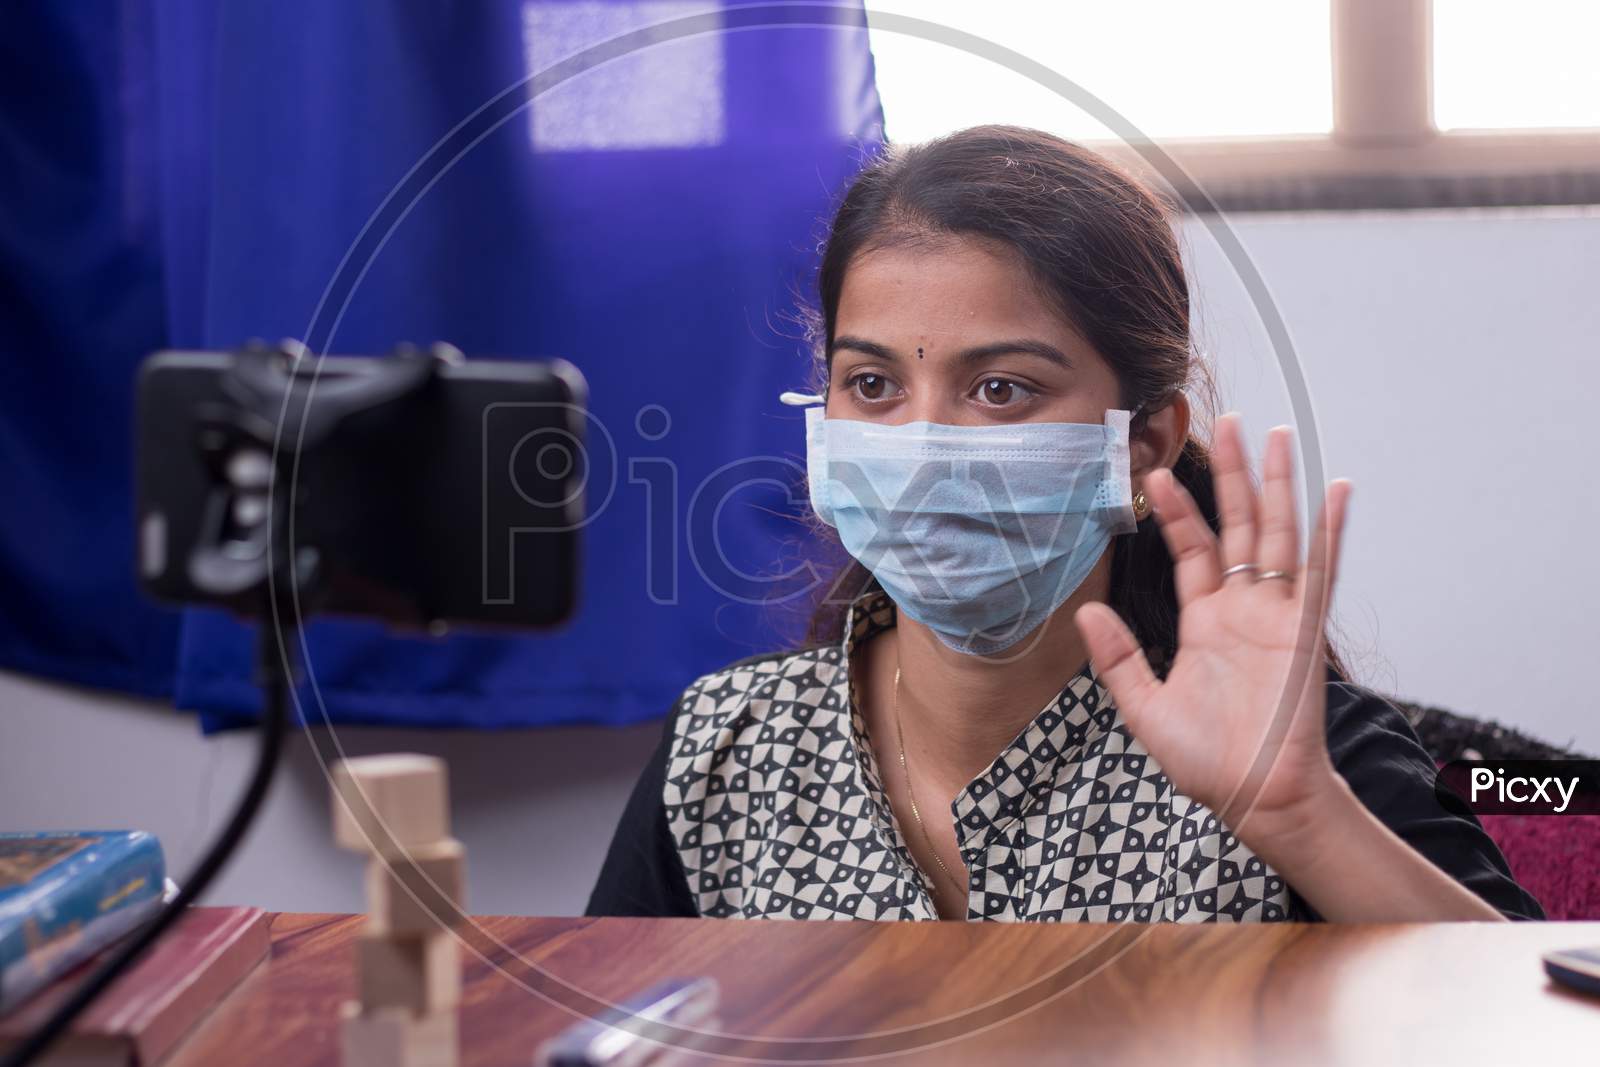 Concept Of Homeschooling And E-Learning, College Girl With Medical Mask Listing Virtual Class On Mobile During Covid-19 Or Coronavirus Pandemic Lock Down.